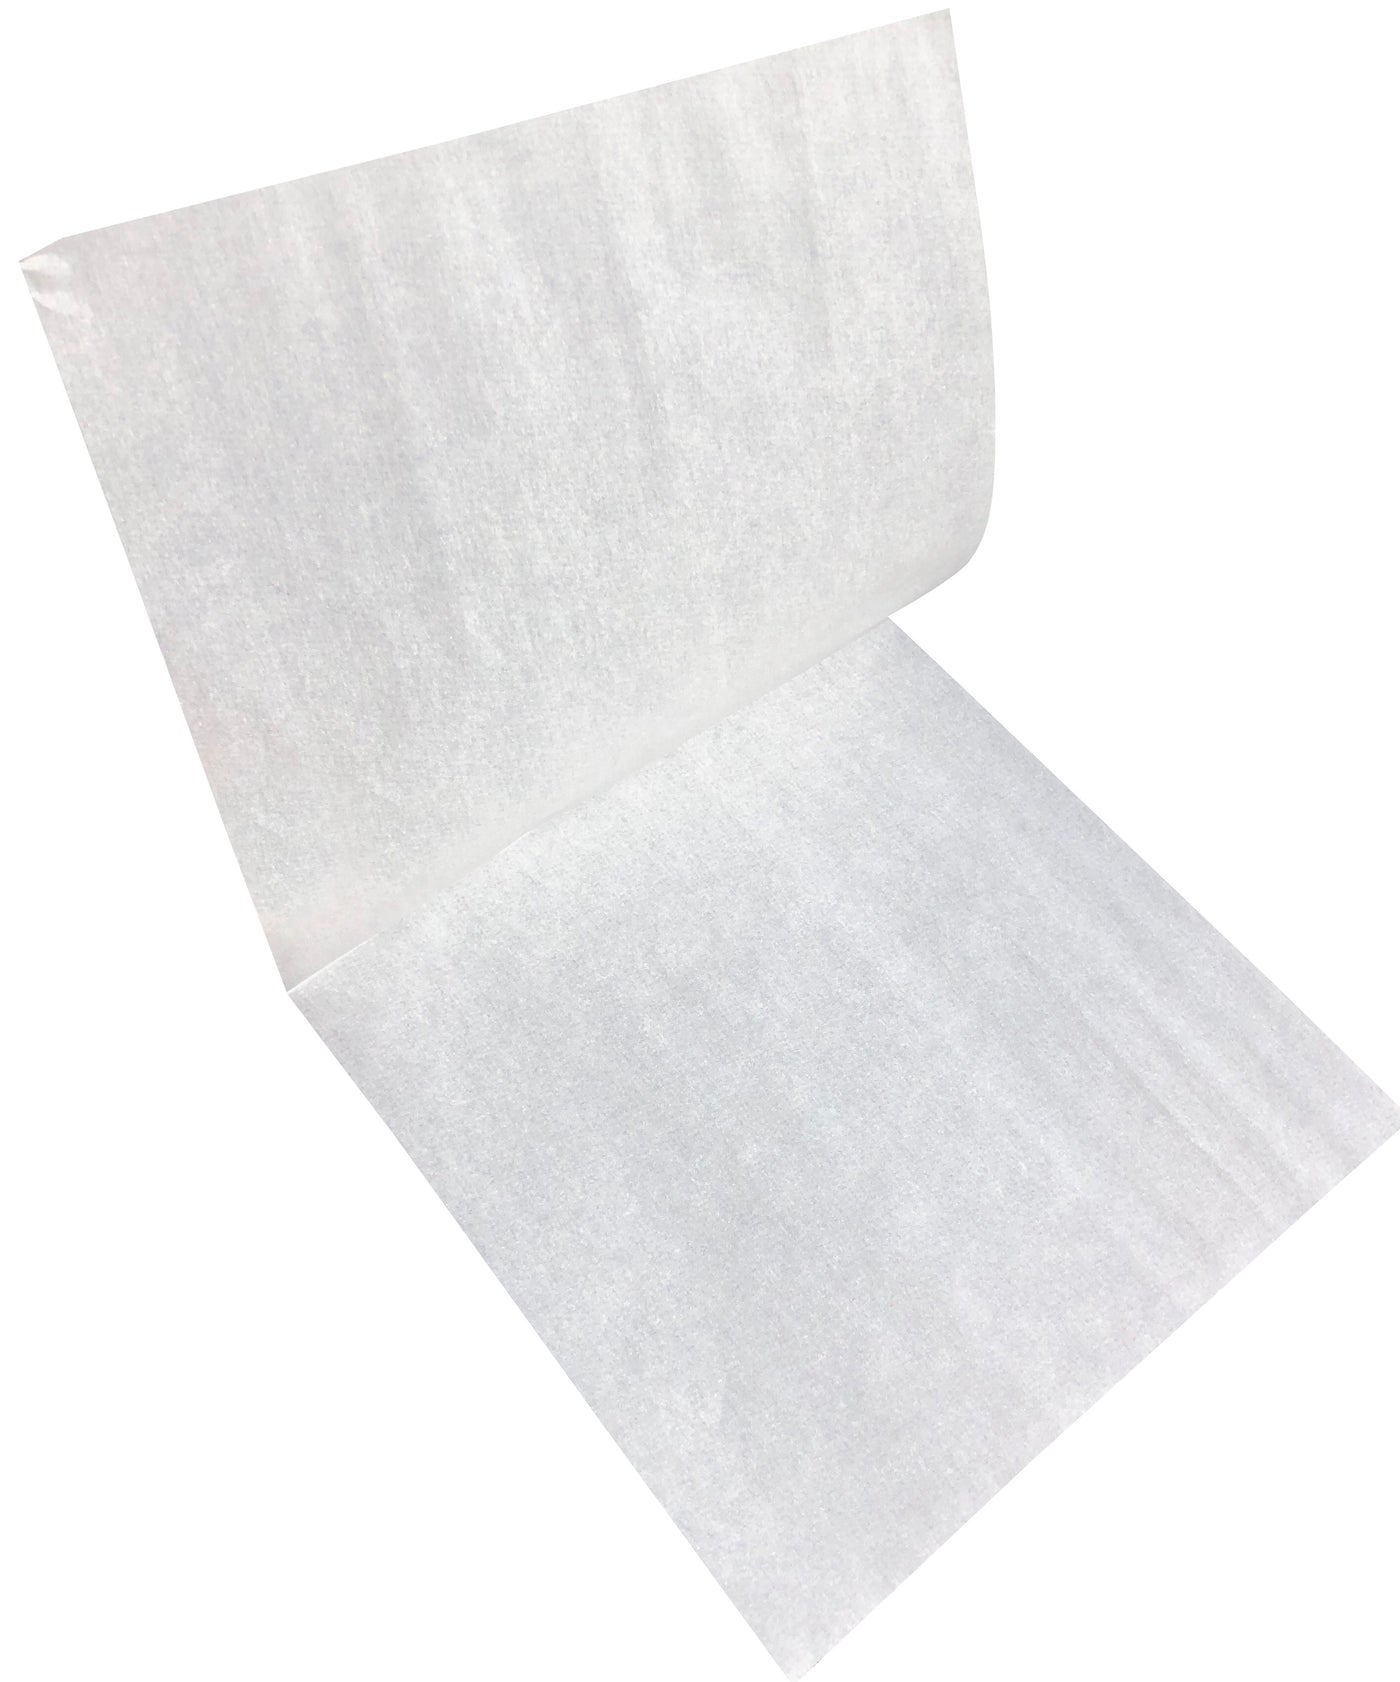 Silicone Coated Parchment Paper - 12 x 16 Half Sheet - White